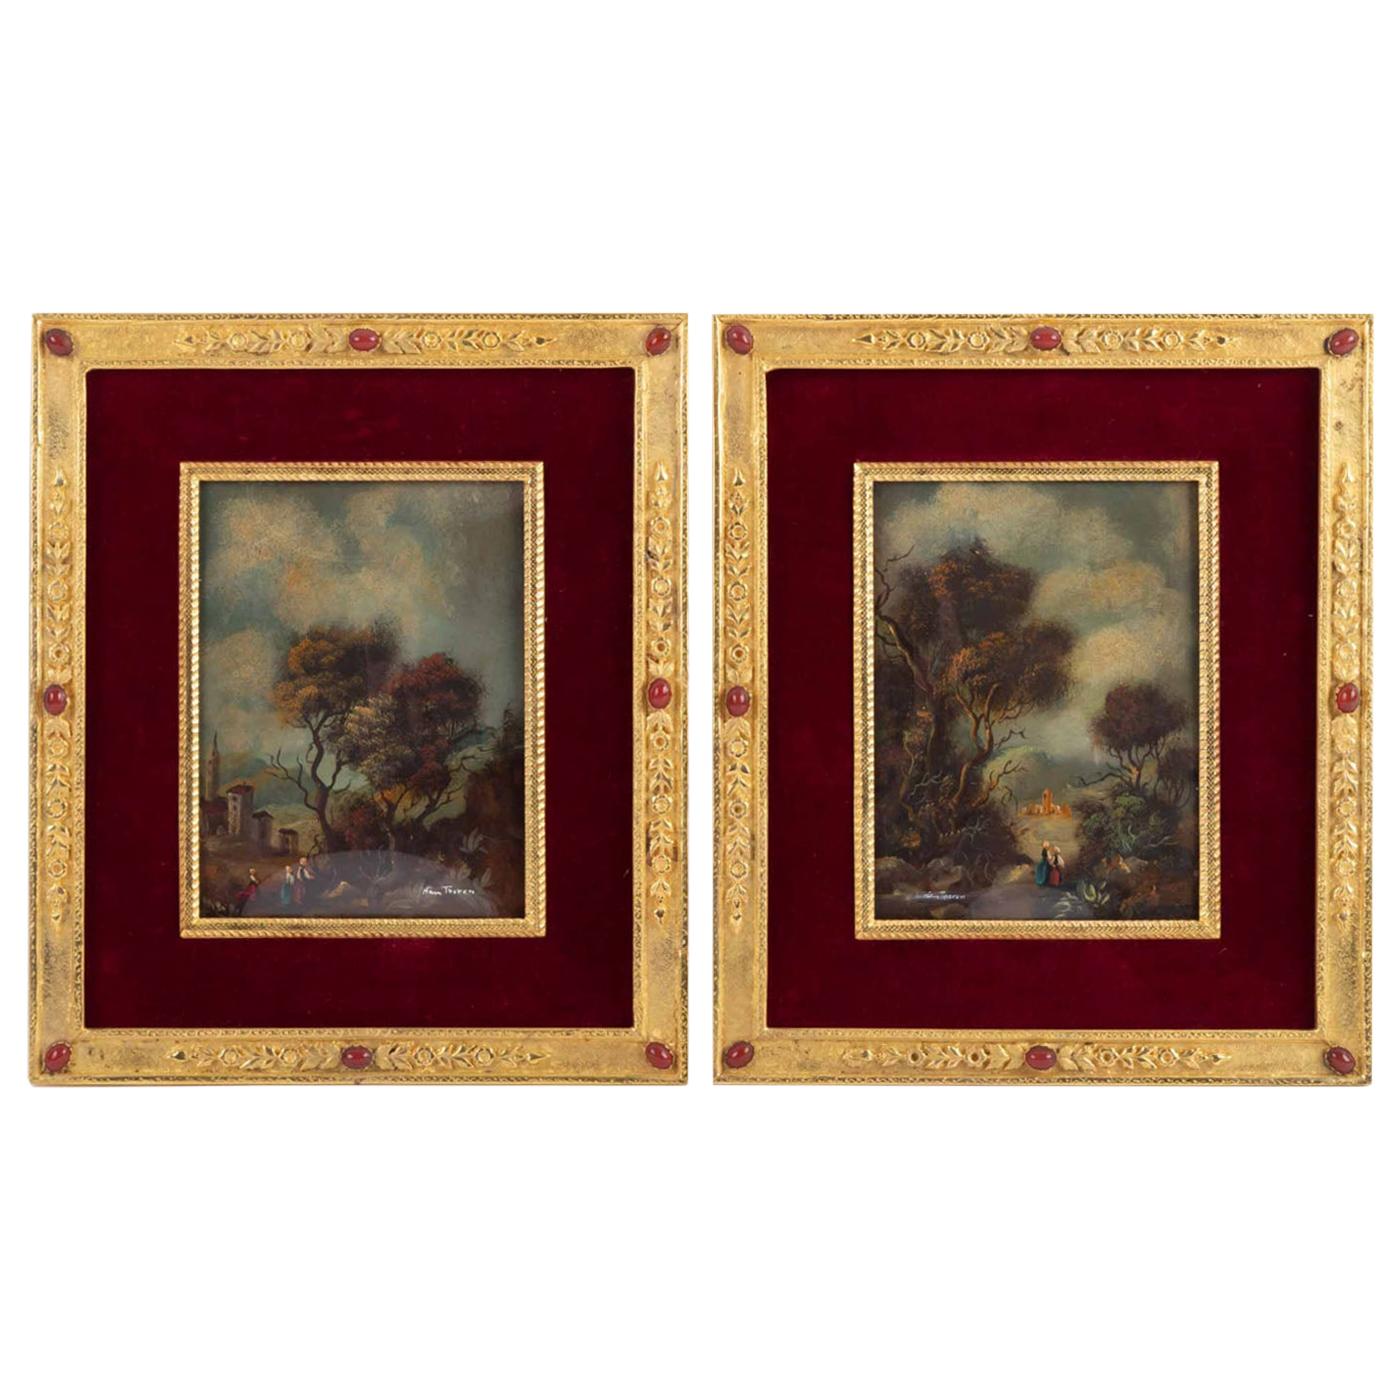 Pair of Painting on Porcelain Gilded Bronze Frame 19th Century Napoleon III